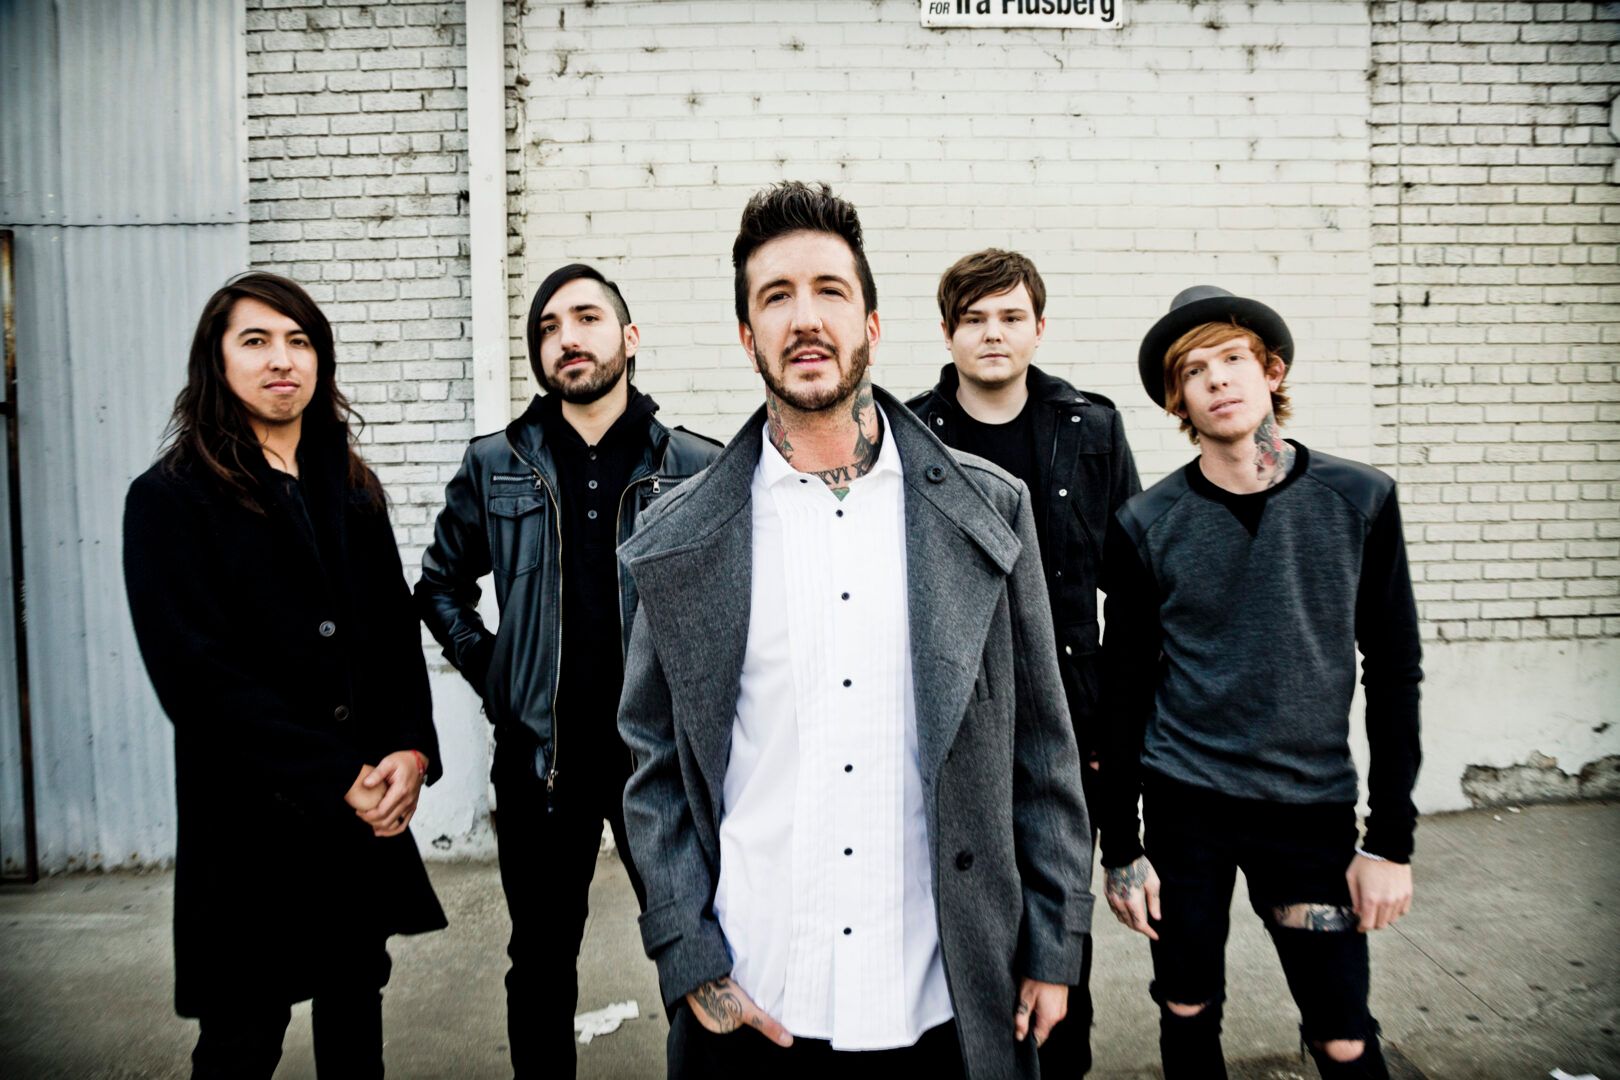 Of Mice & Men Adds Dates To The “Full Circle Tour”